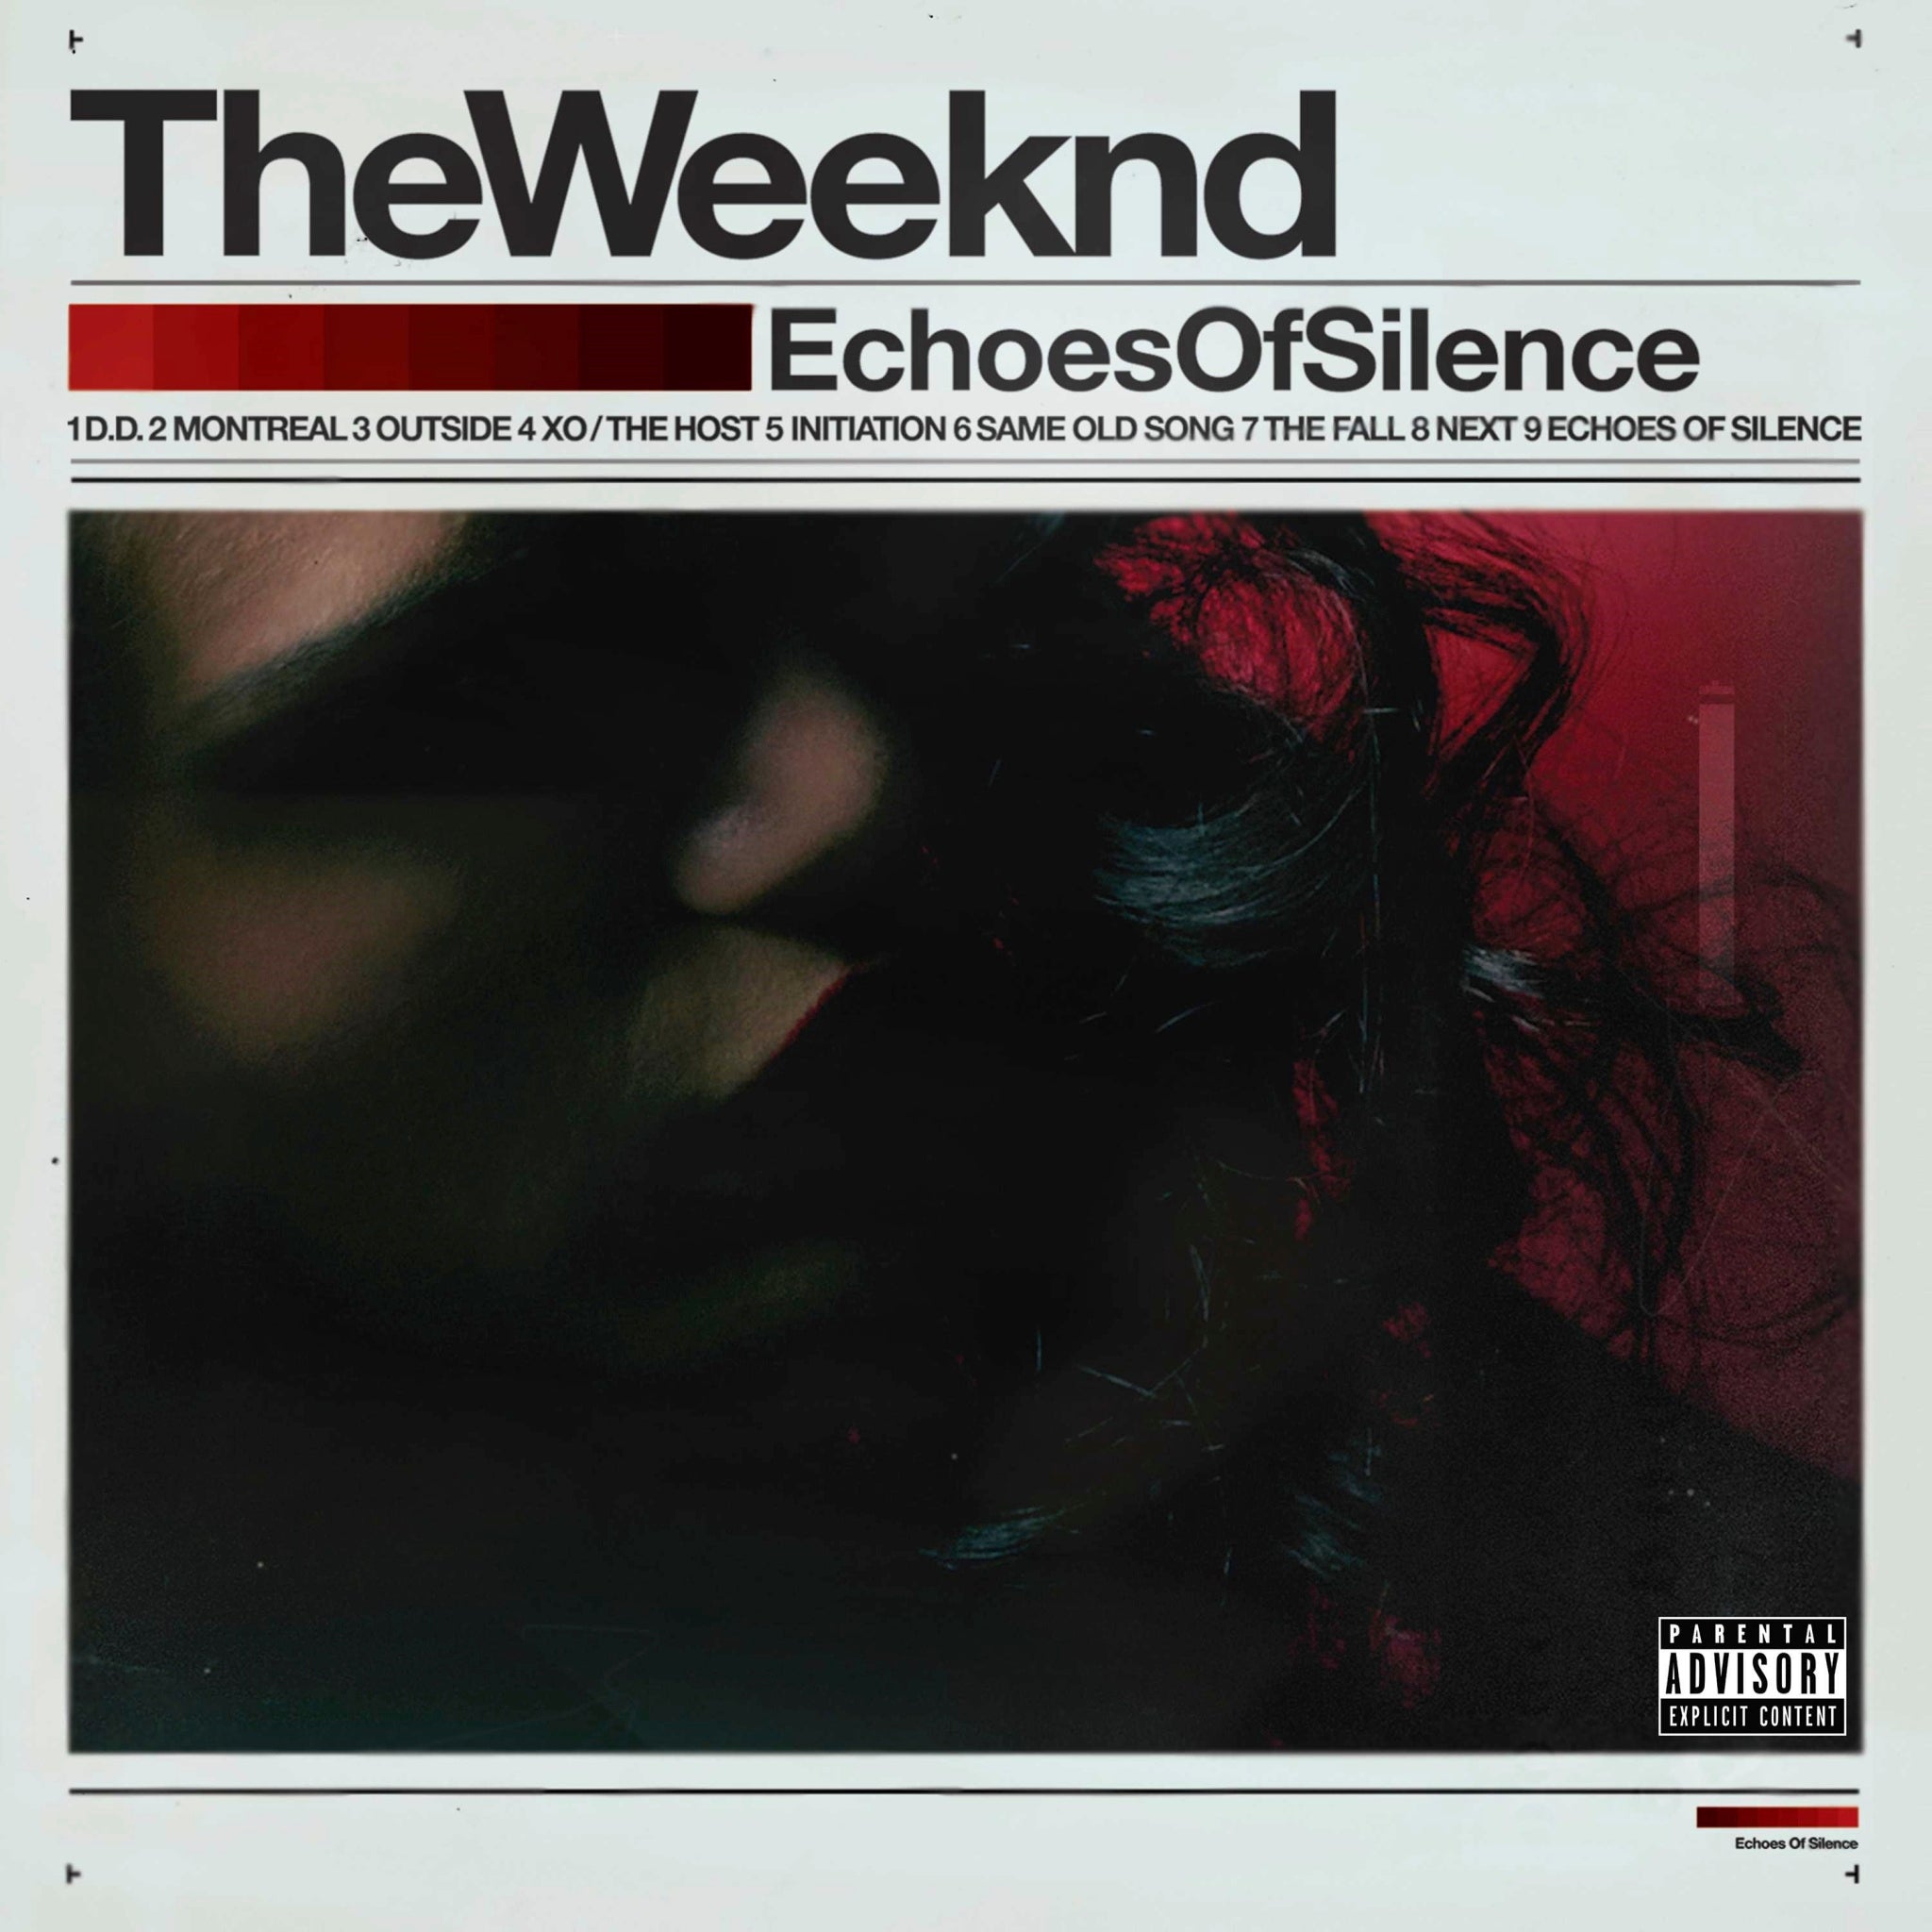 [DAMAGED] The Weeknd - Echoes Of Silence (10th Anniversary) [2LP] [LIMIT 1 PER CUSTOMER]